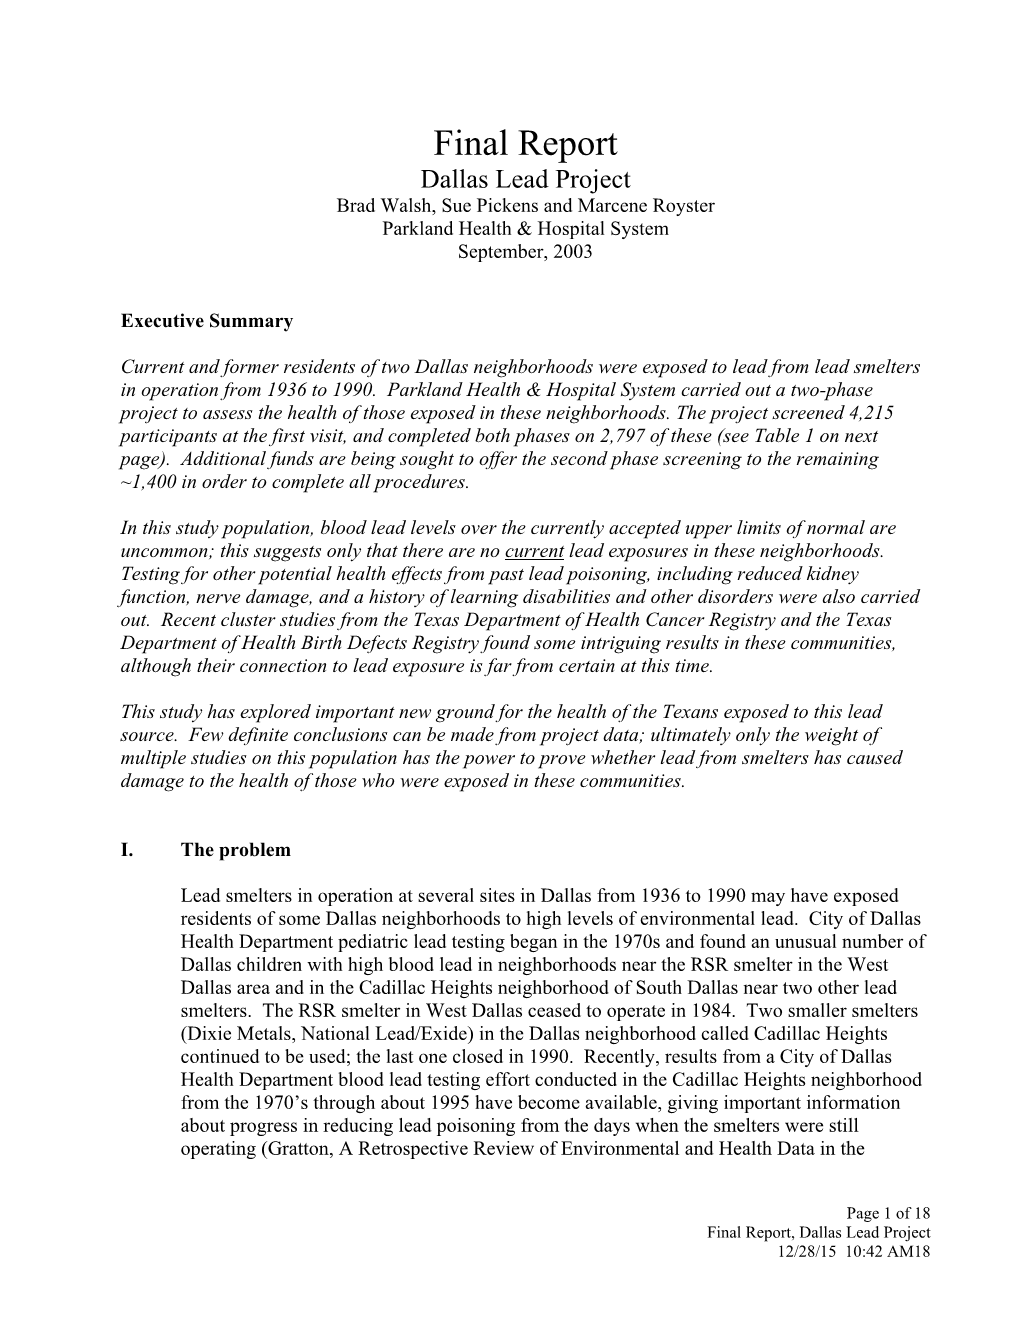 Final Report Dallas Lead Project Brad Walsh, Sue Pickens and Marcene Royster Parkland Health & Hospital System September, 2003